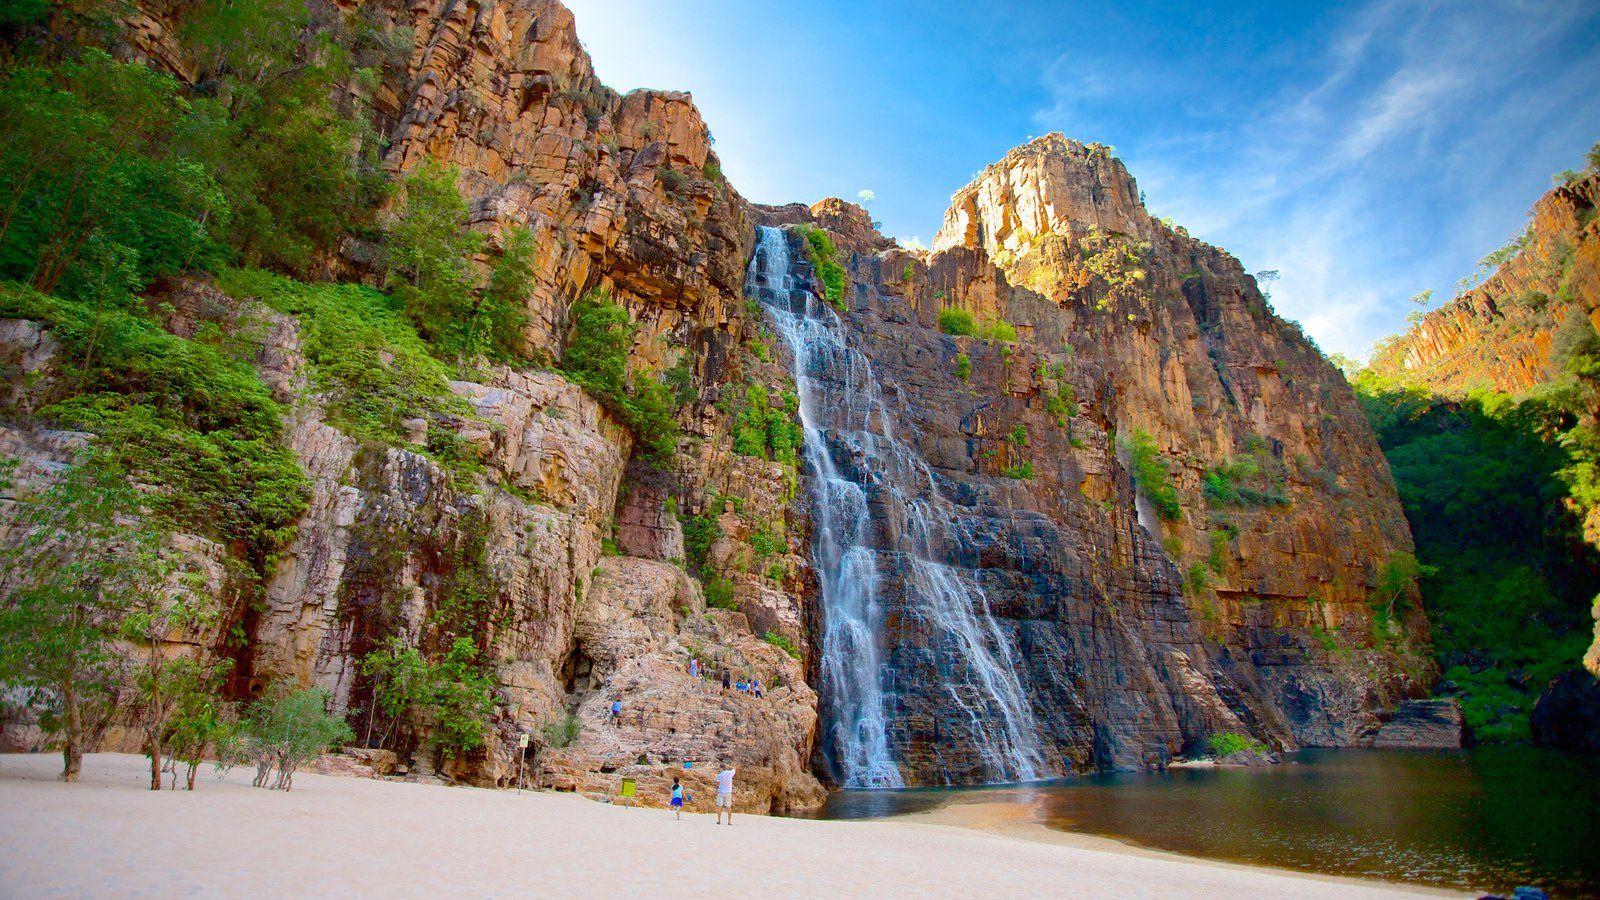 Waterfall Picture: View Image of Kakadu National Park